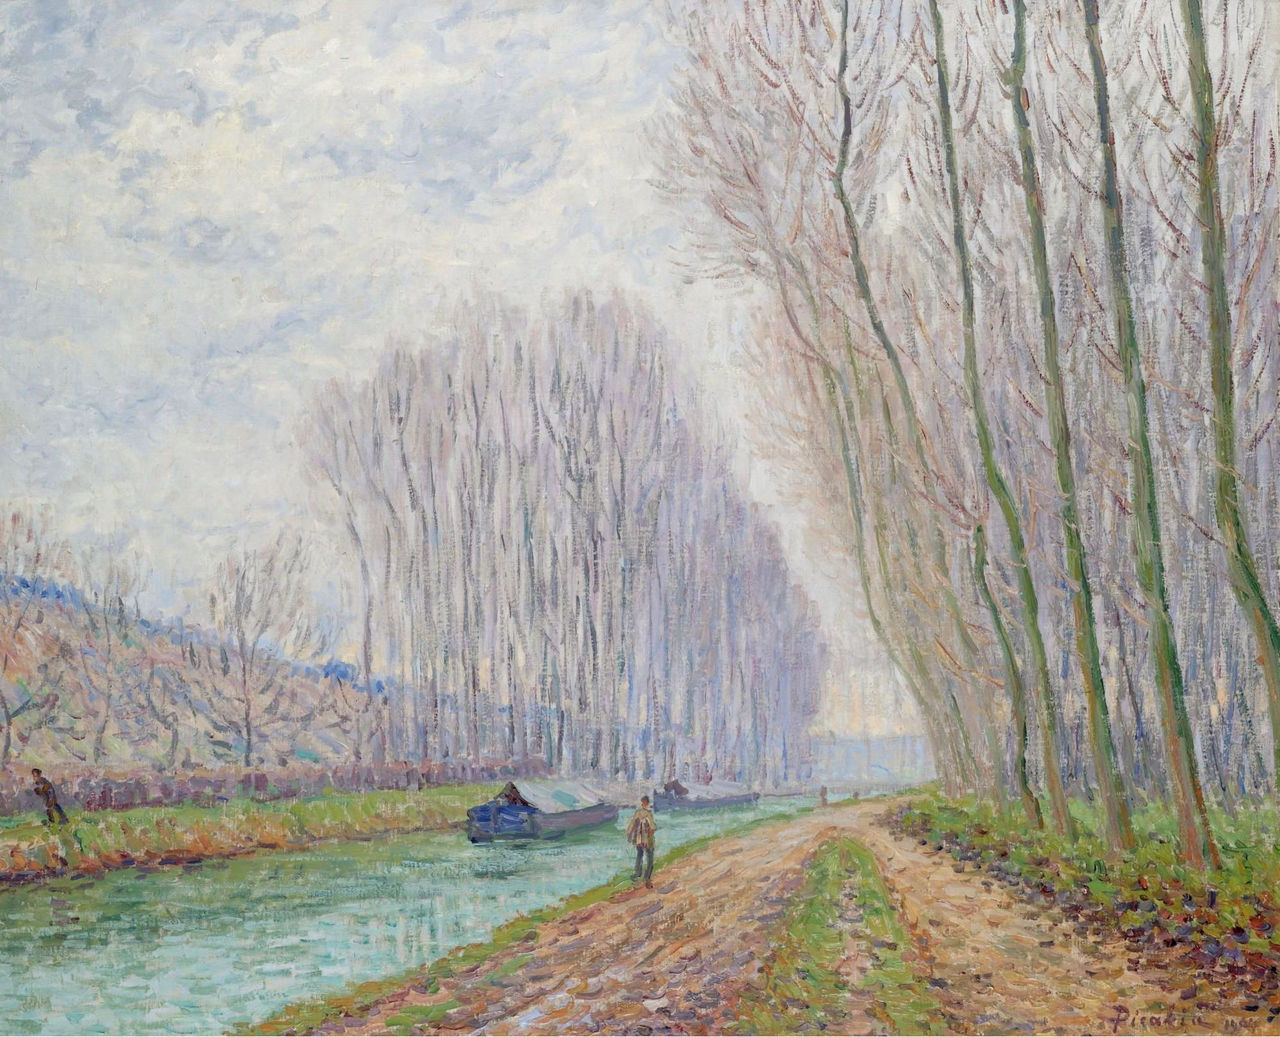 Francis Picabia (French, 1879-1953) - Canal of Moret, Winter effect, 1904